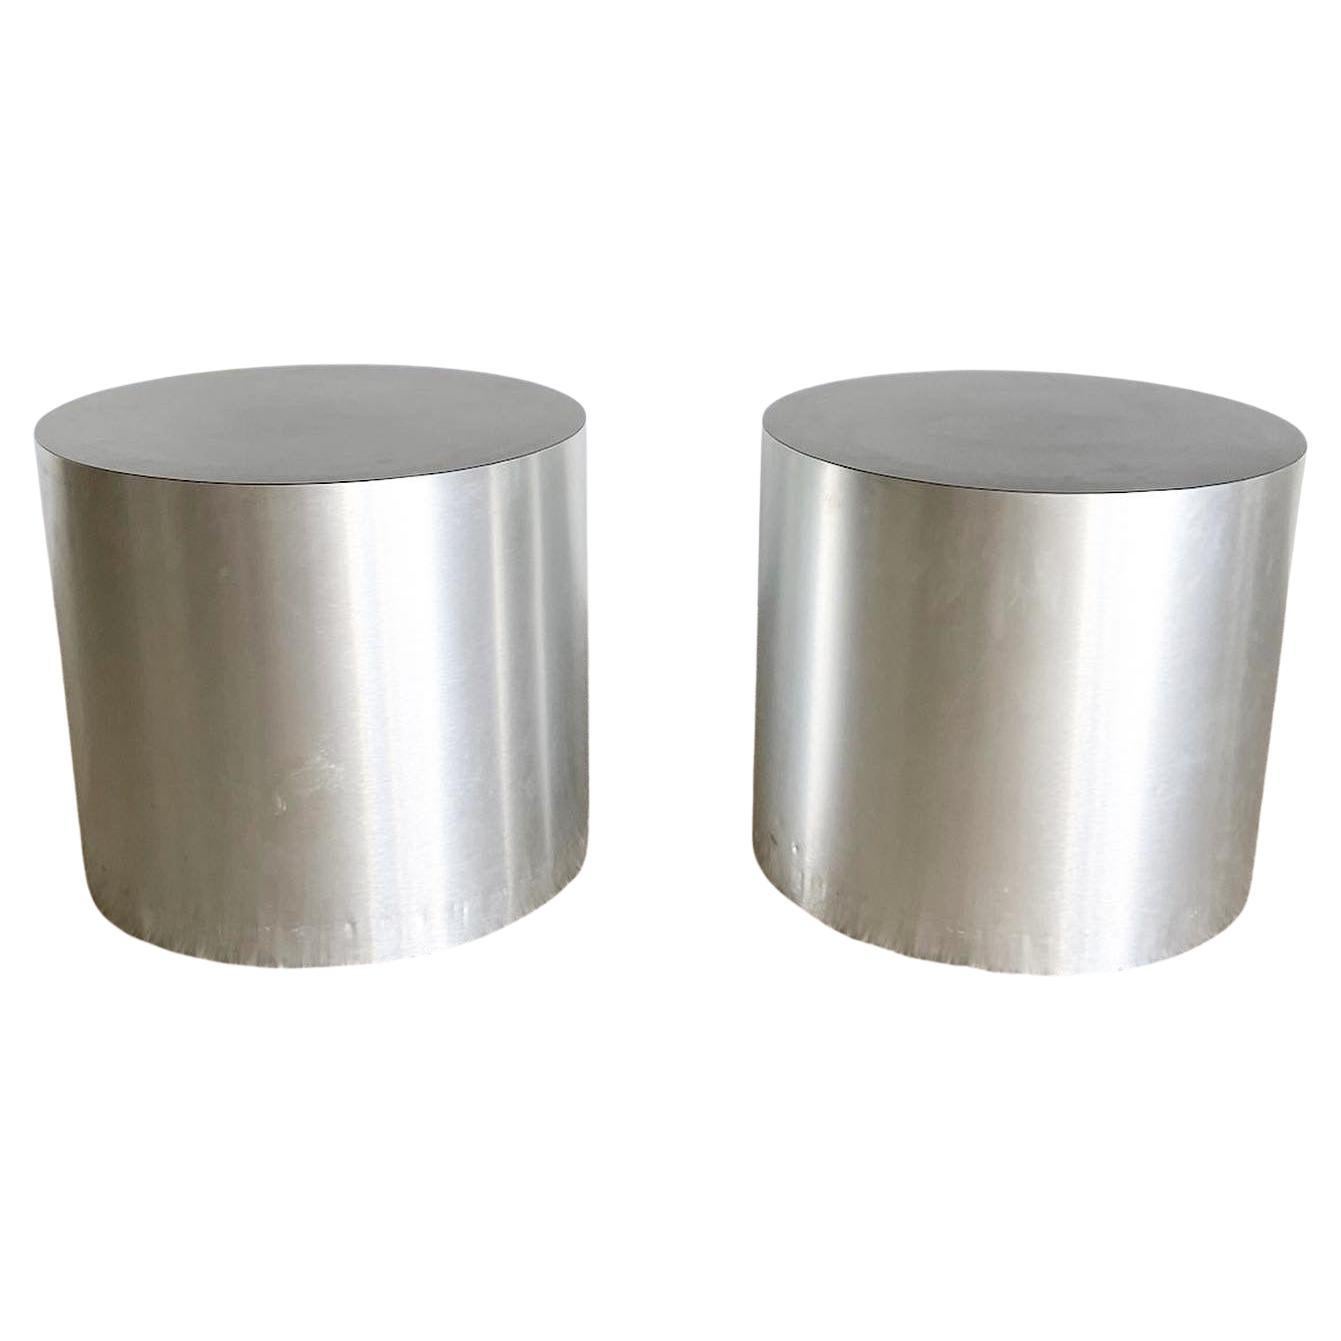 Postmodern Cylindrical Brushed Steel Laminate and Black Side Tables, a Pair For Sale